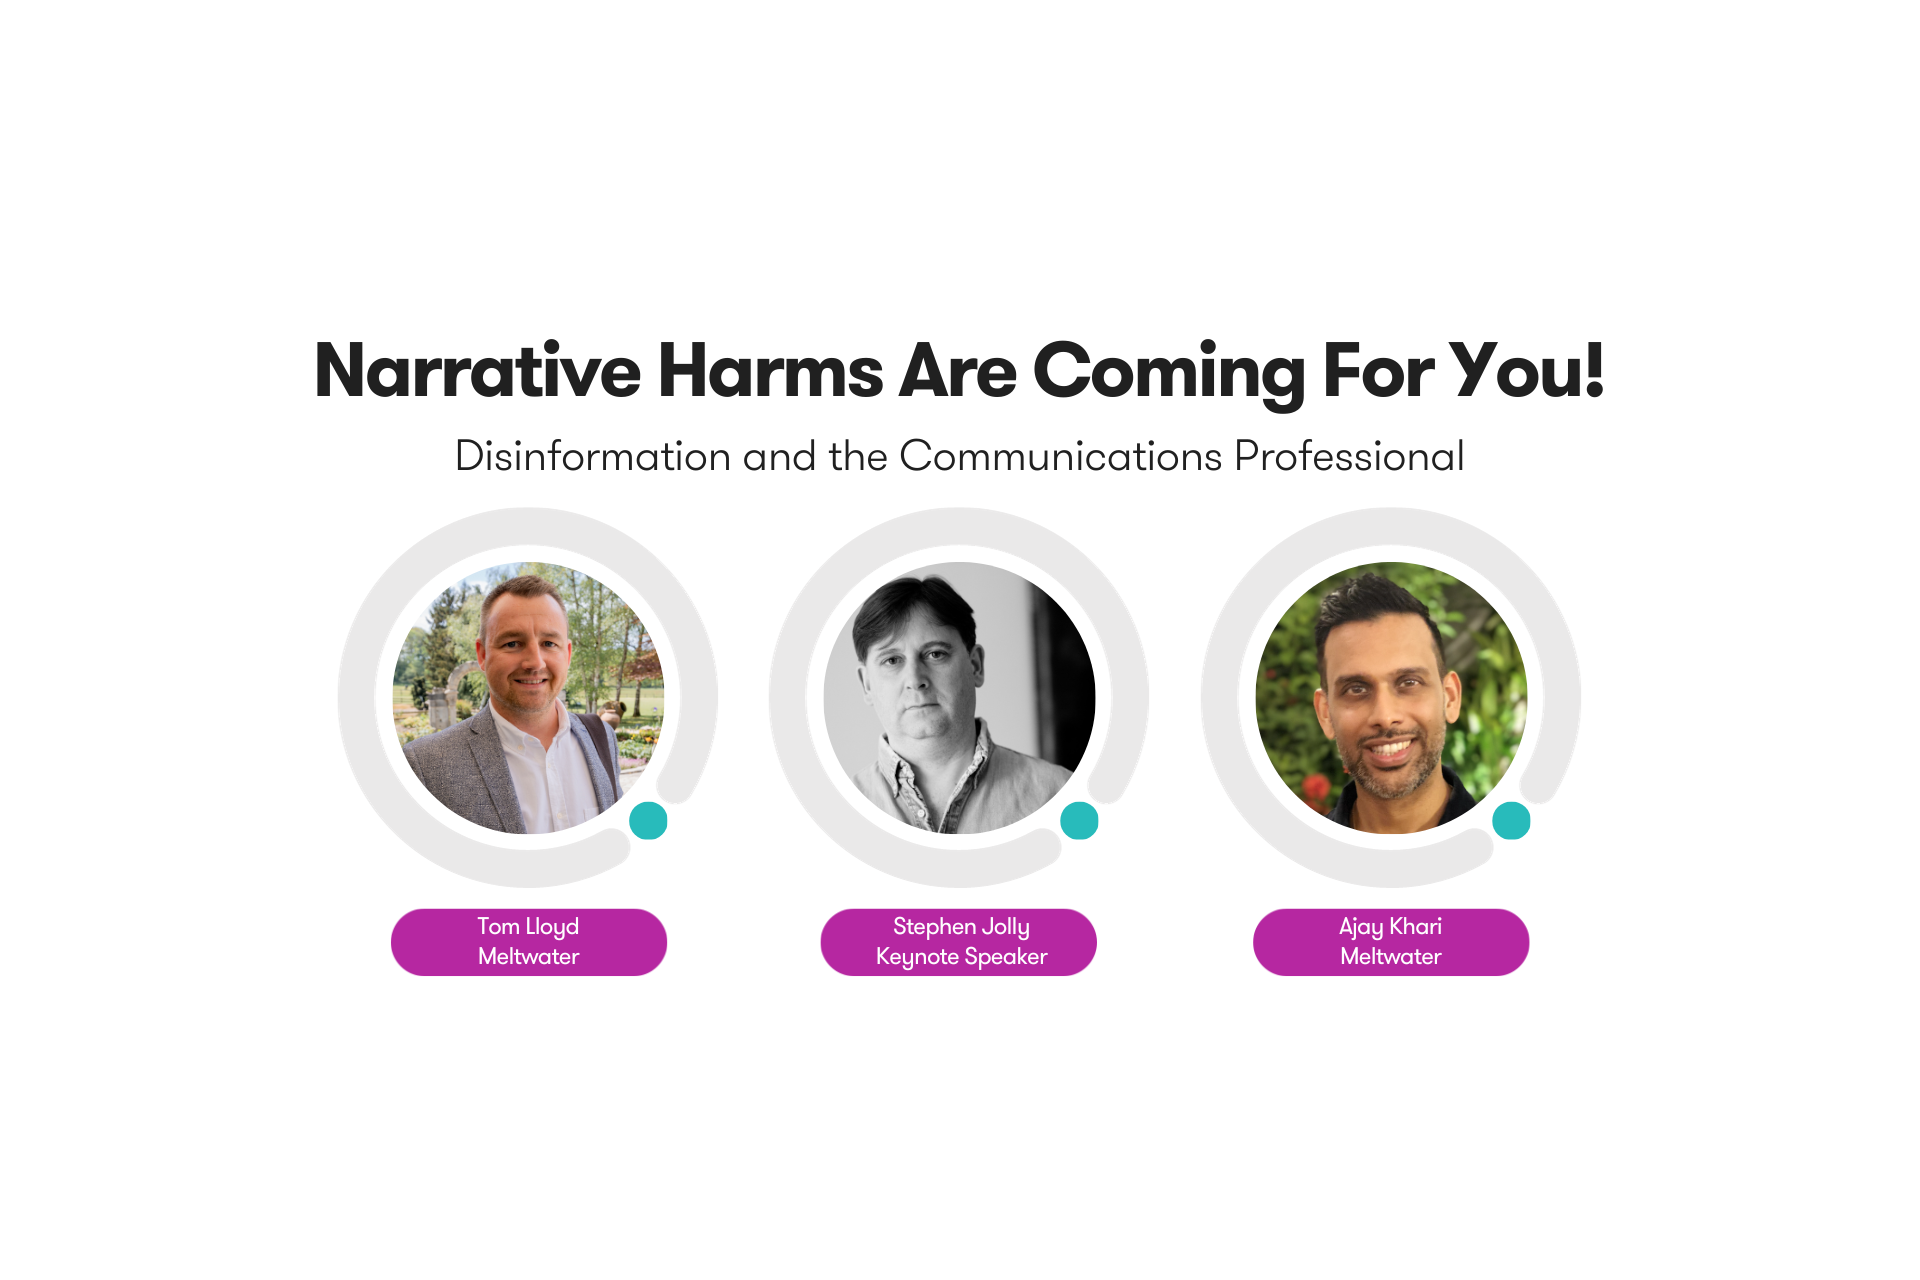 Narrative Harms are coming for you! Disinformation and the communications professional webinar banner